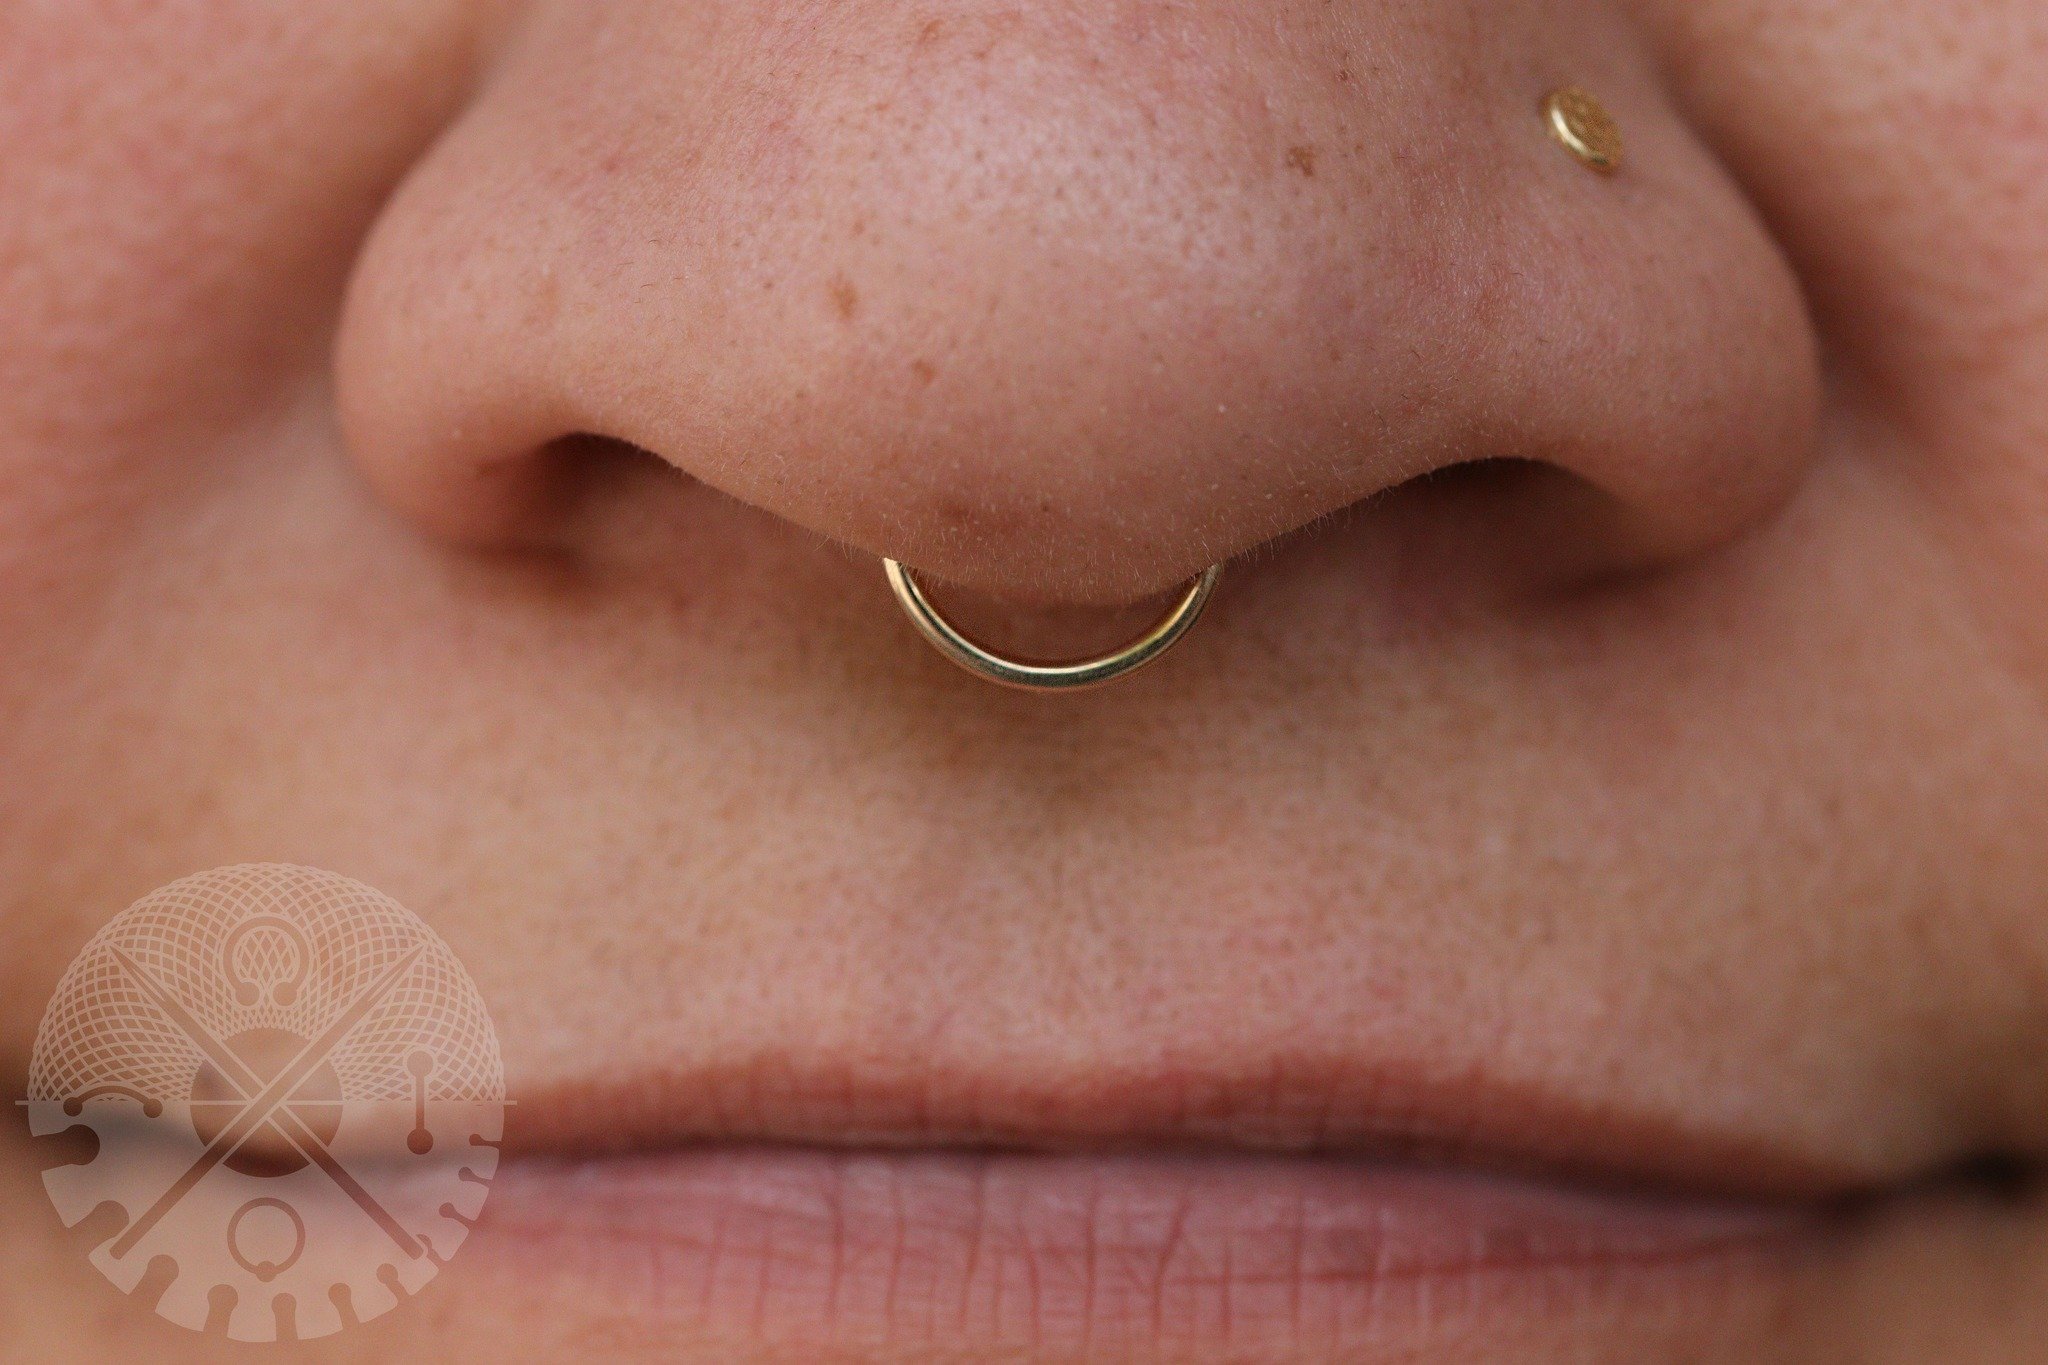 Another nose for the books!

Good Life is appointment only for all services, consultations and even just to browse our jewelry selection. We are available for appointments through our online booking system at https://goodlifeakron.as.me/schedule.php 